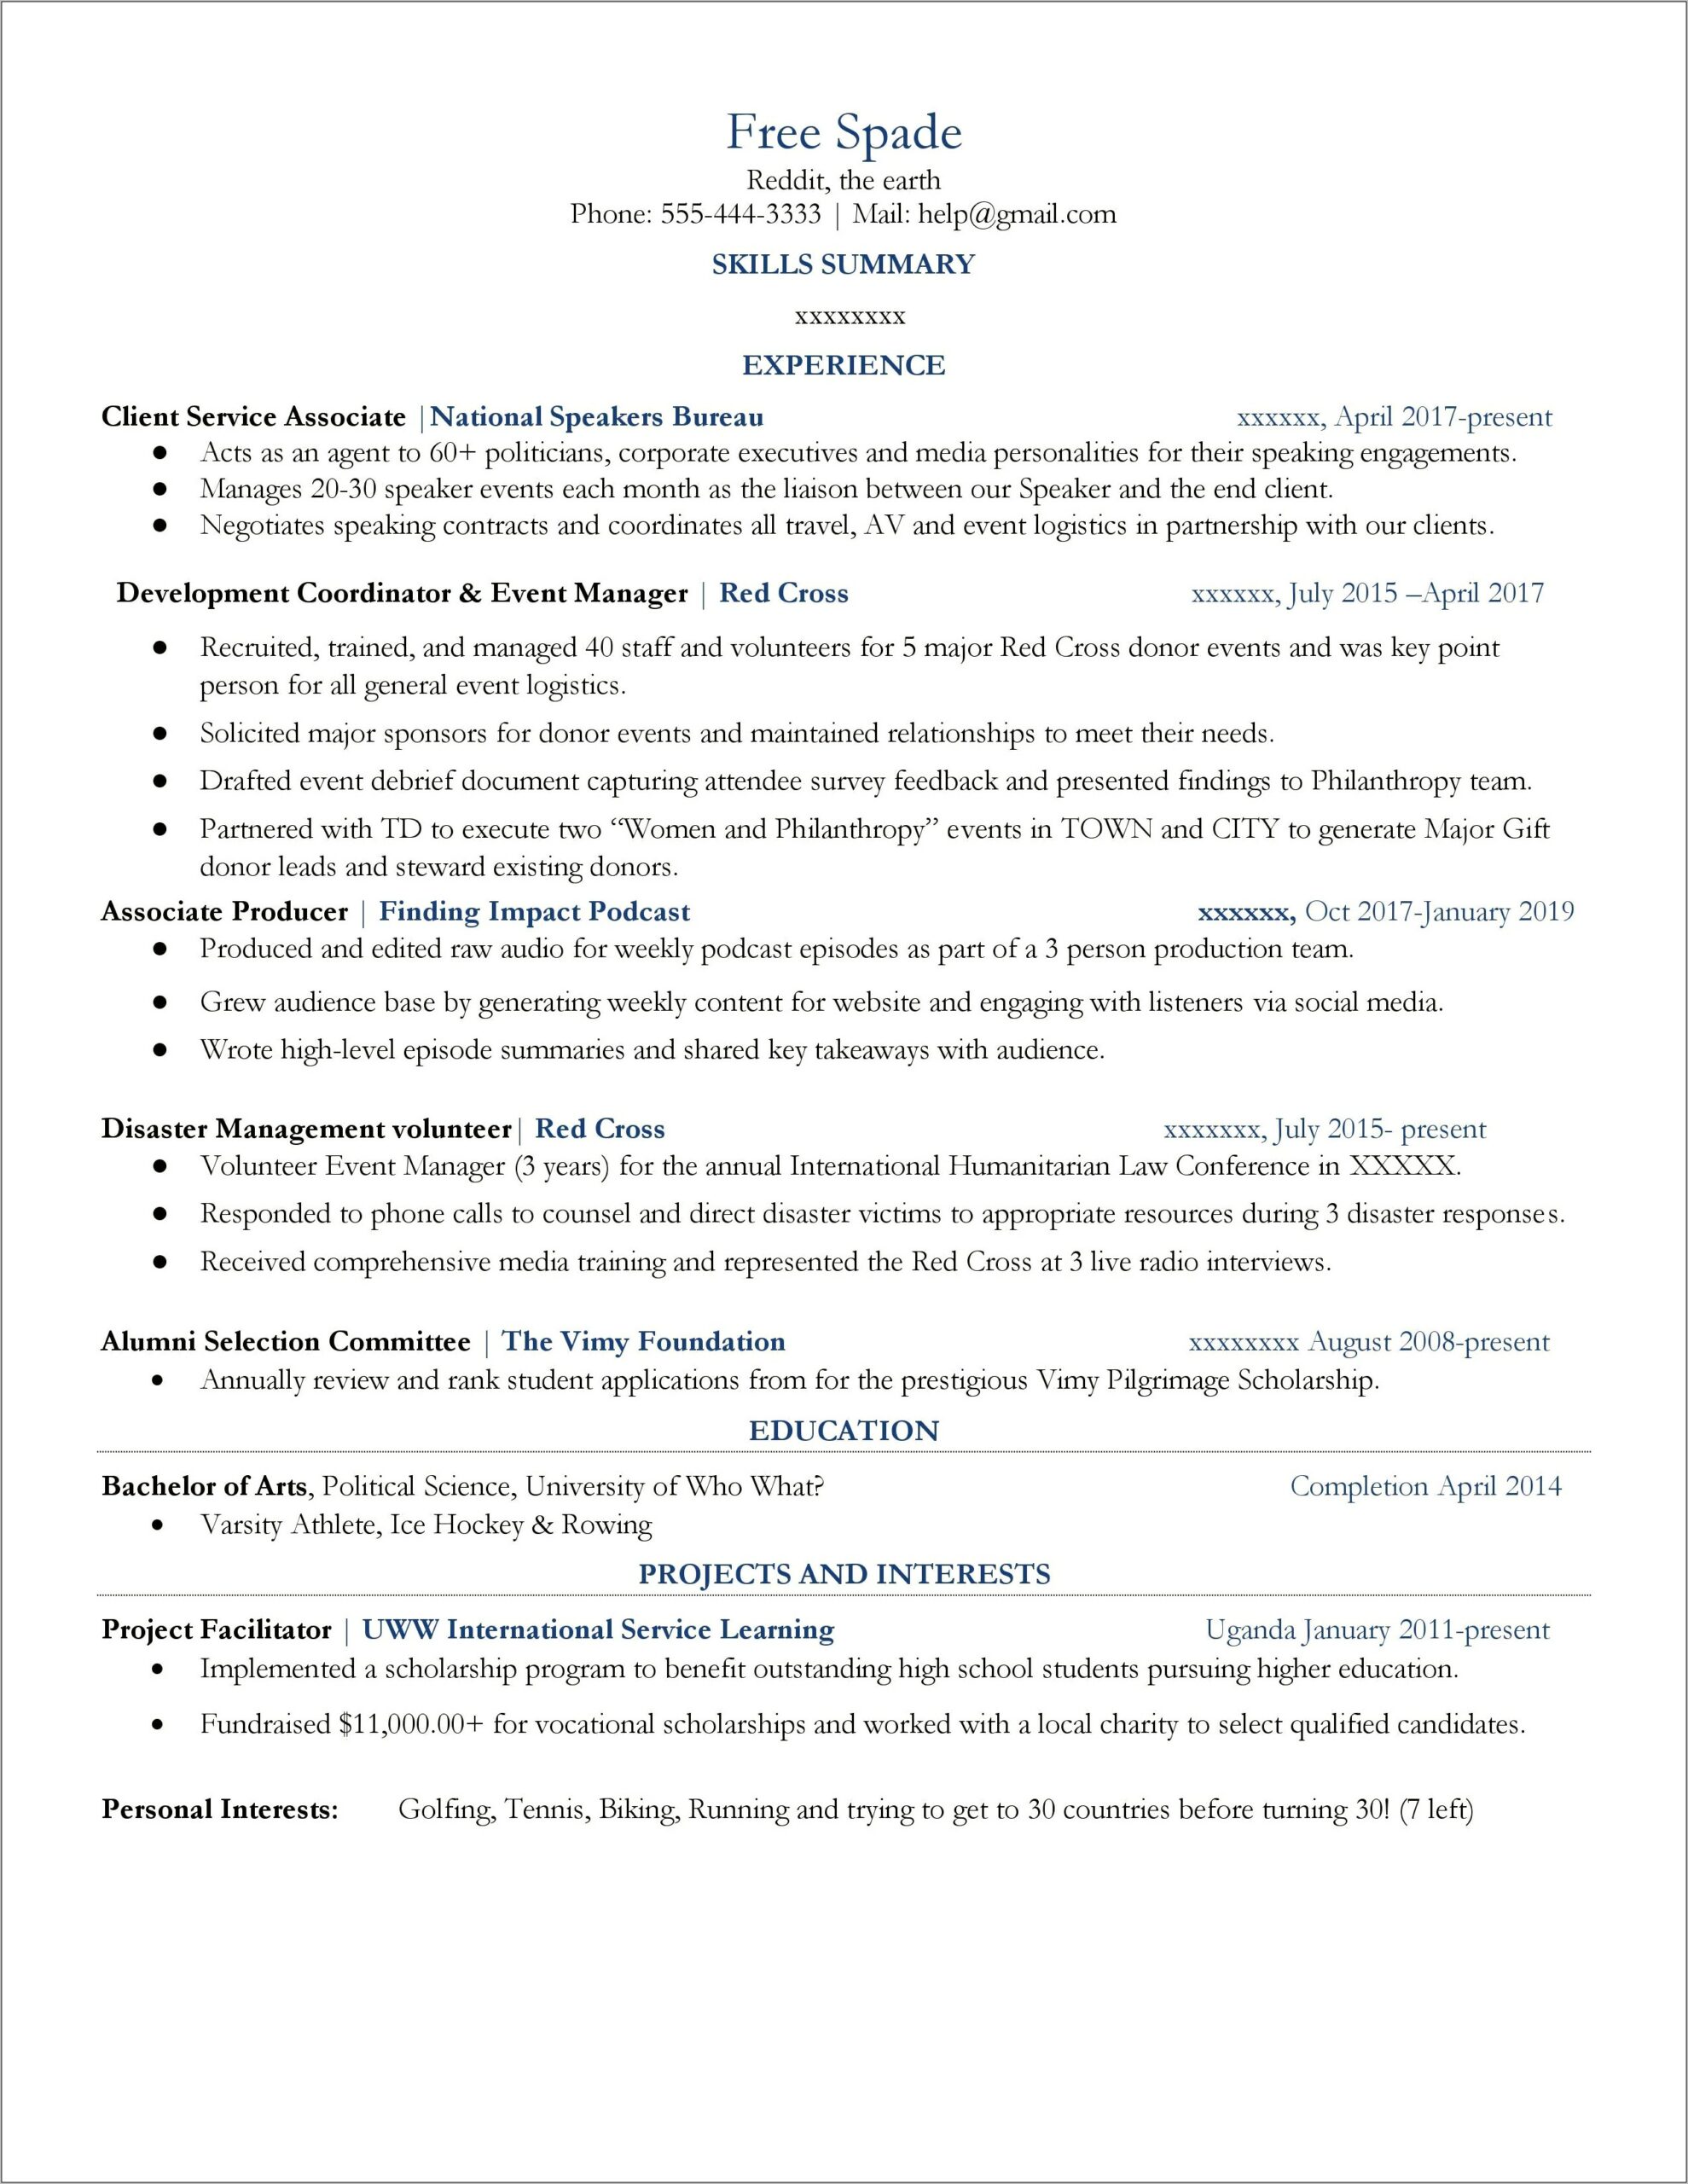 Sample Resume With Non Profit Experience